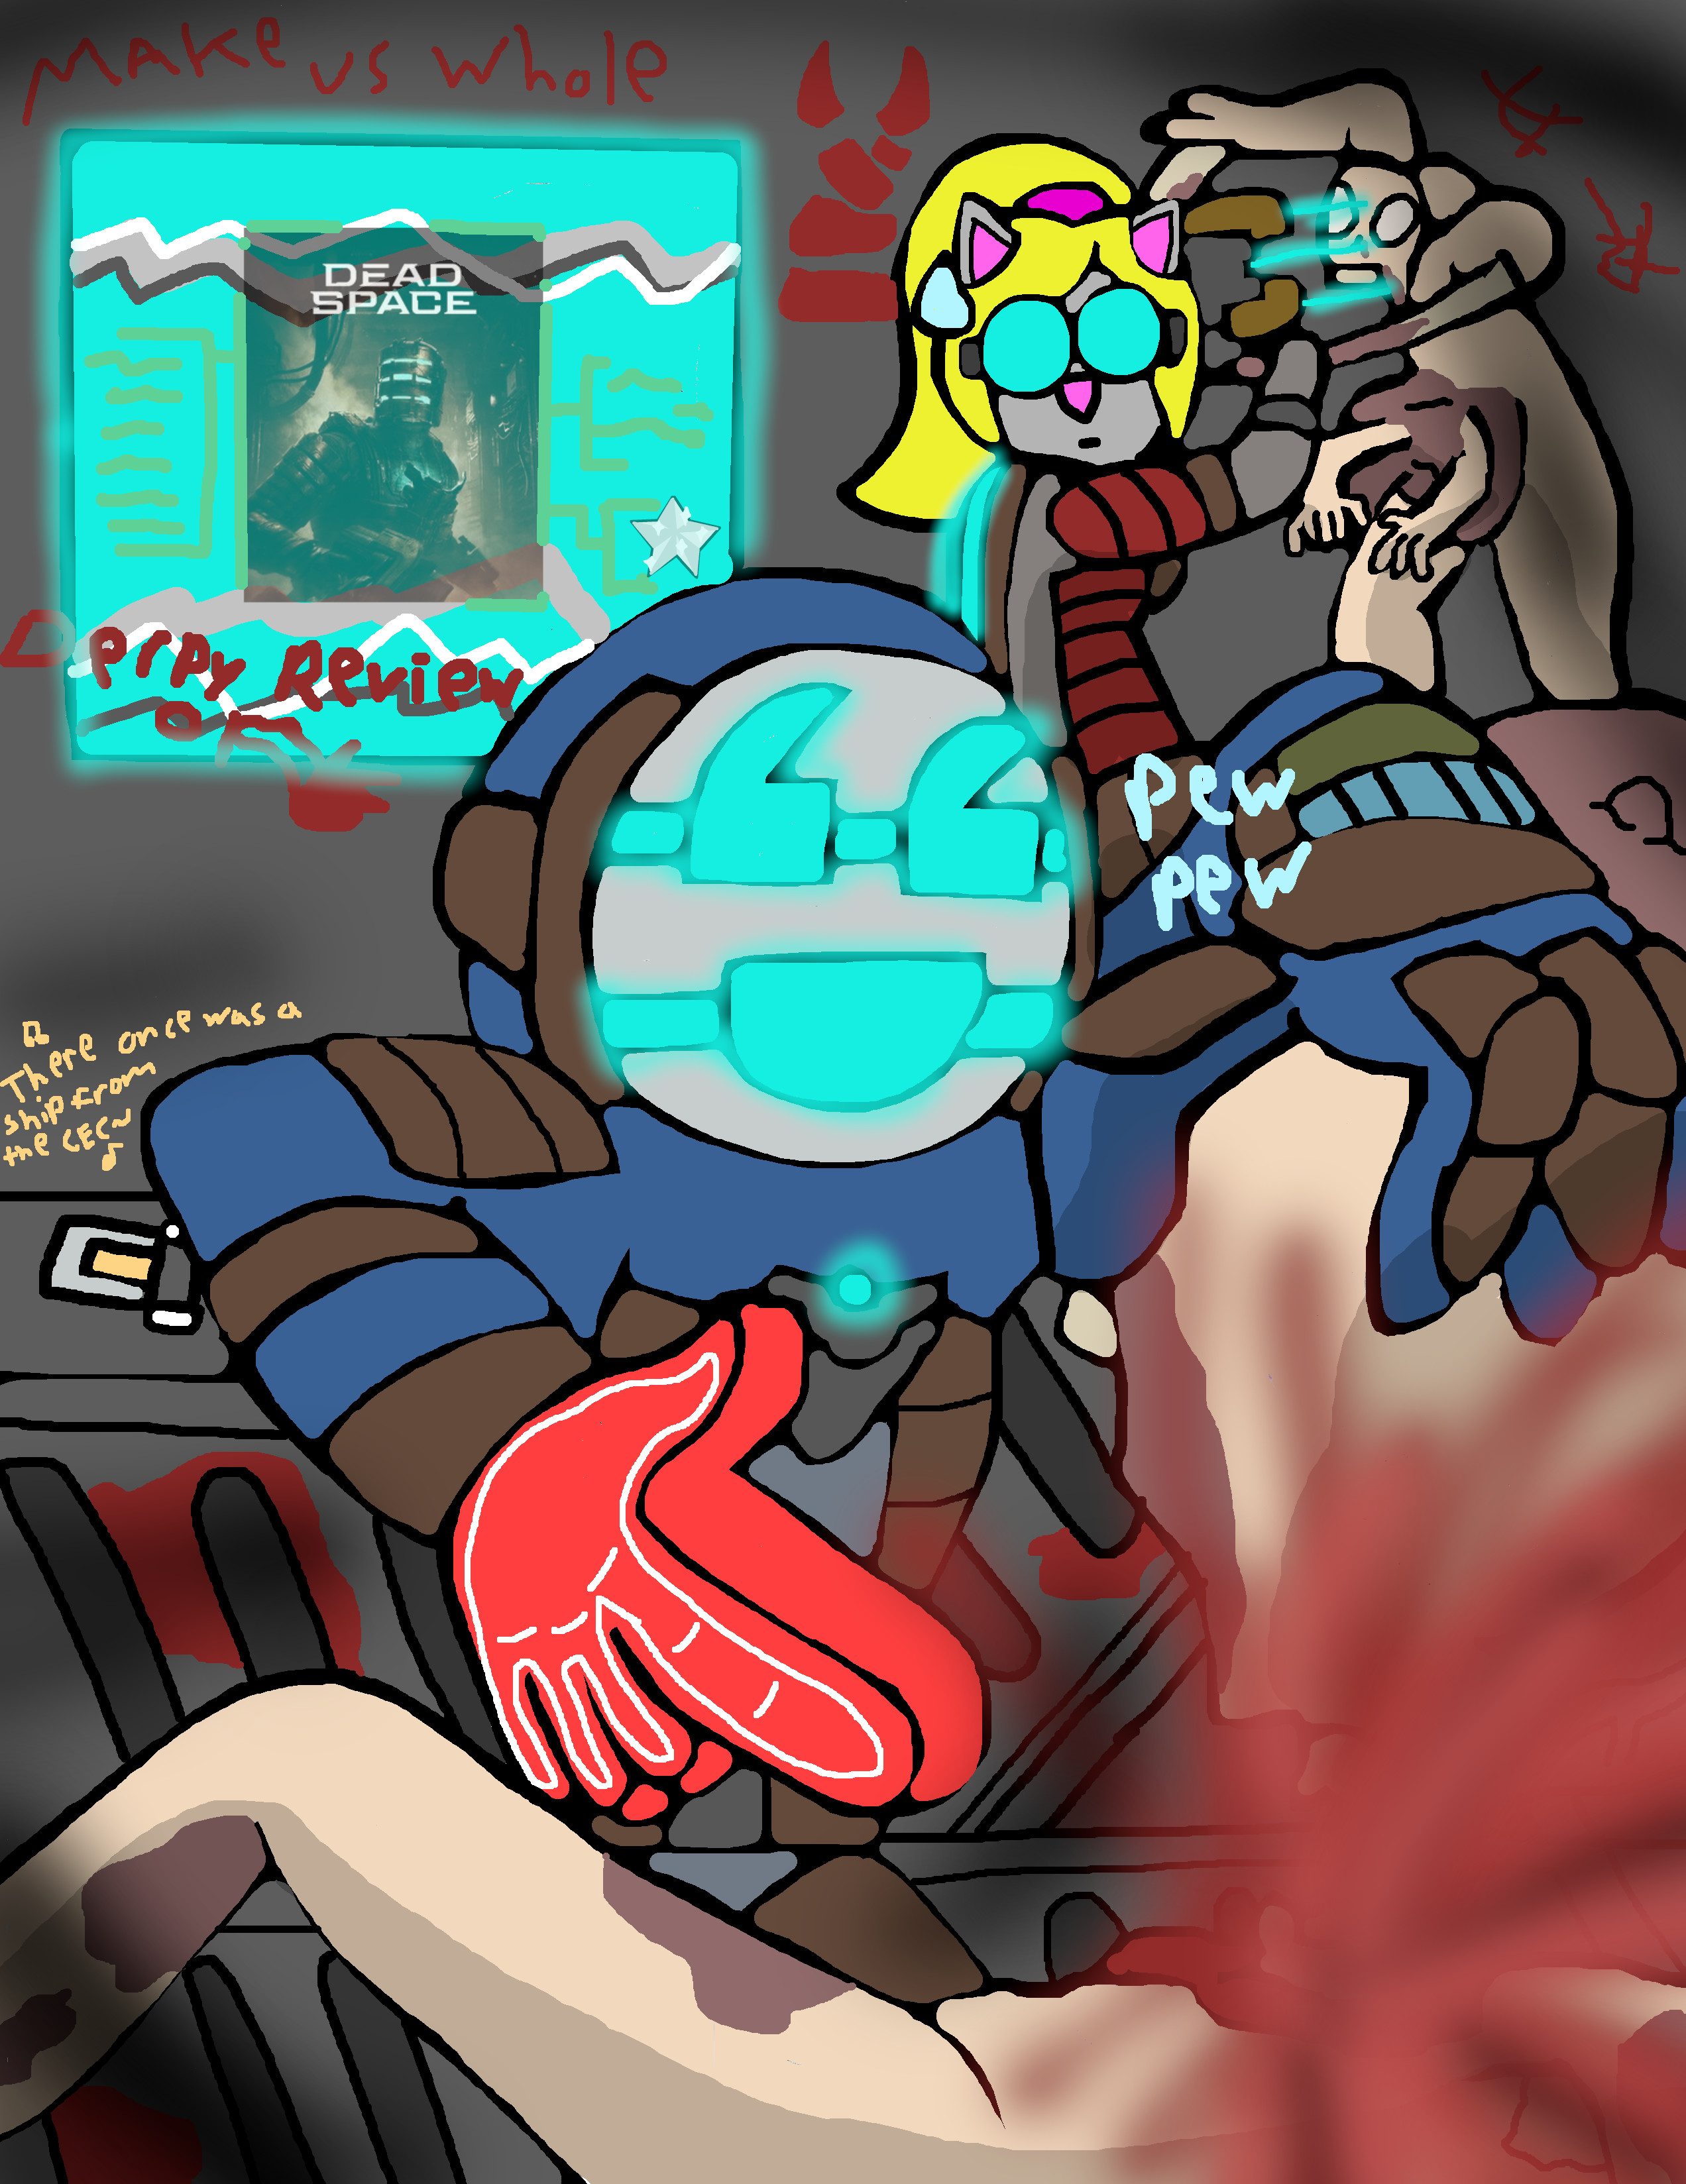 Derpy Review #98: Atomic Heart (request) by MicroGamer1 on DeviantArt